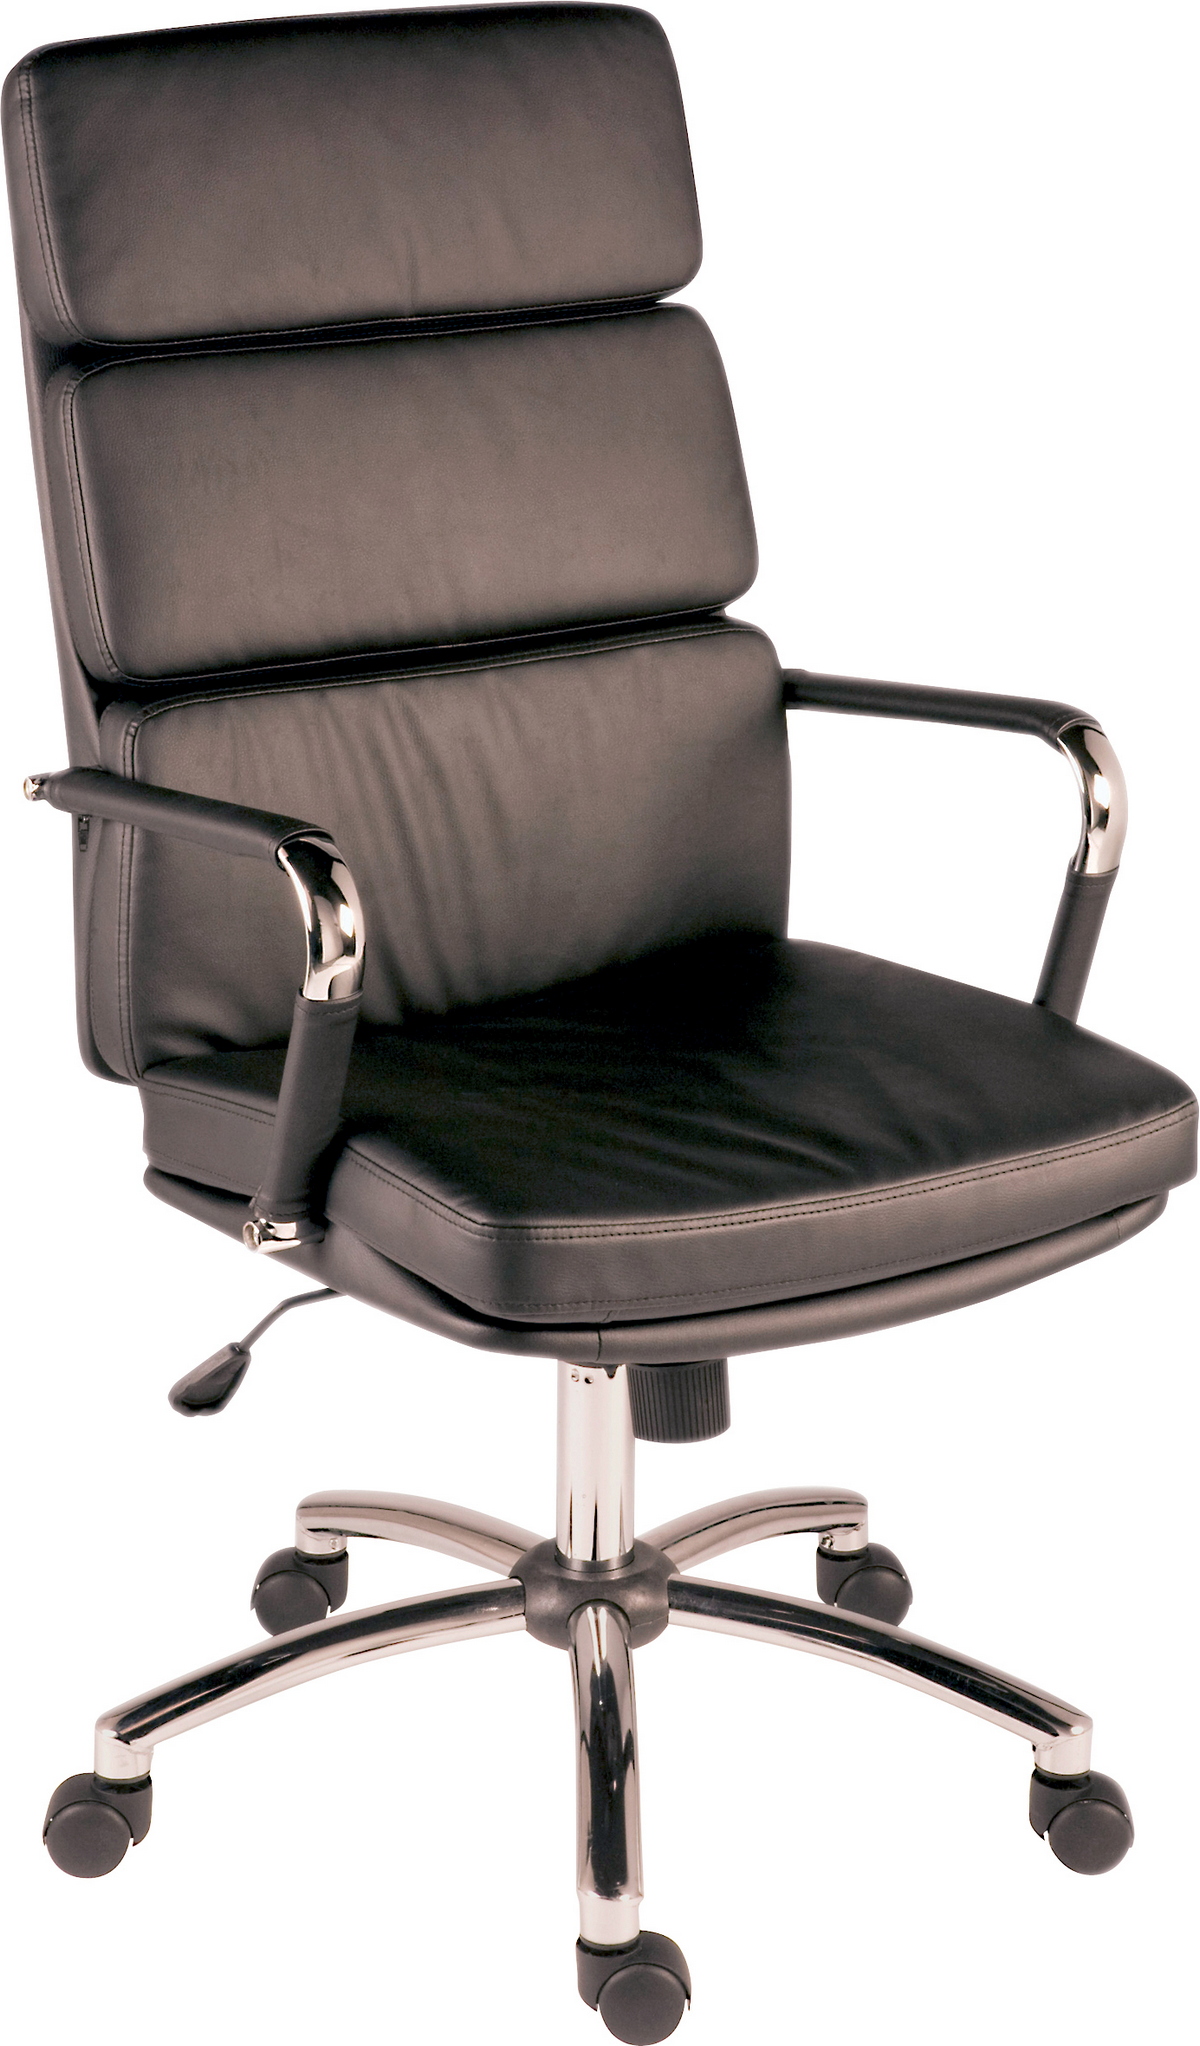 Budget Designer Epsom padded faux leather office executive swivel chair brown